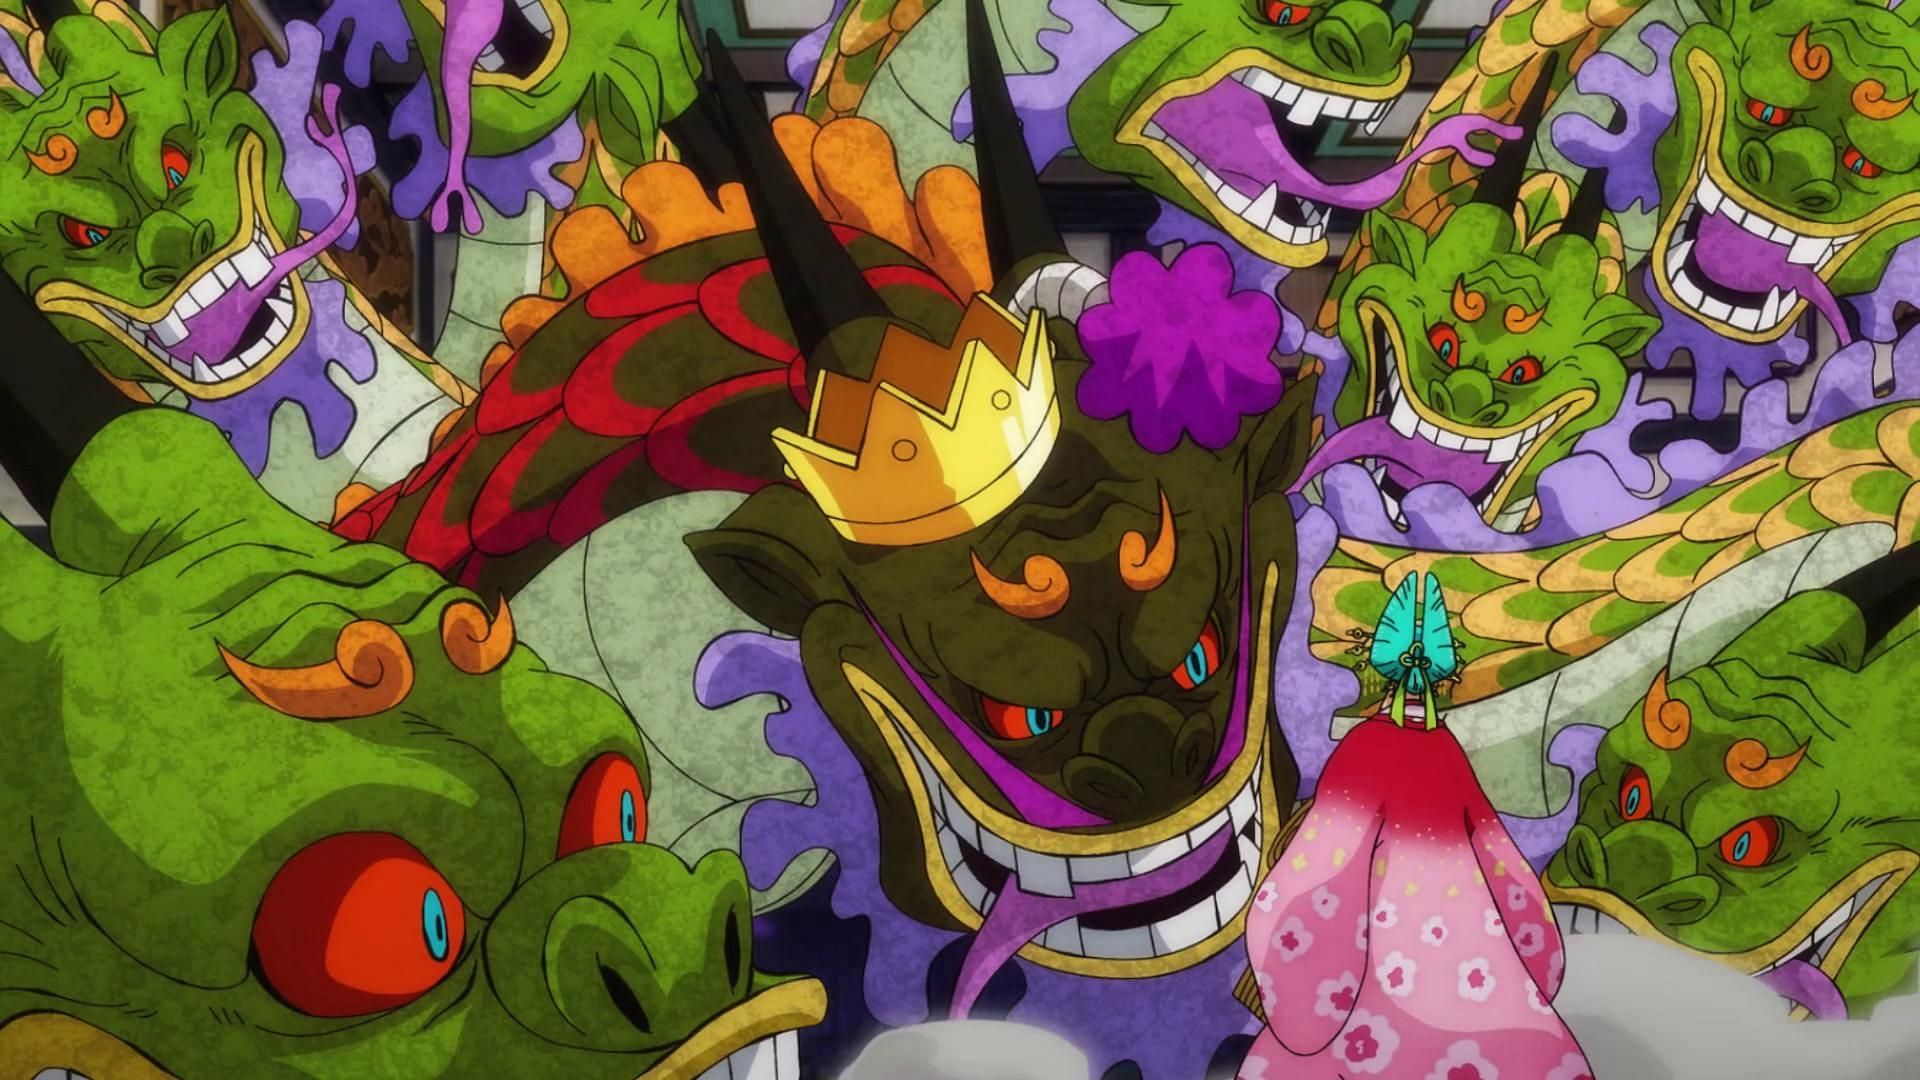 Despite being a weak character, Orochi ate a very powerful Zoan Fruit (Image via Toei Animation, One Piece)